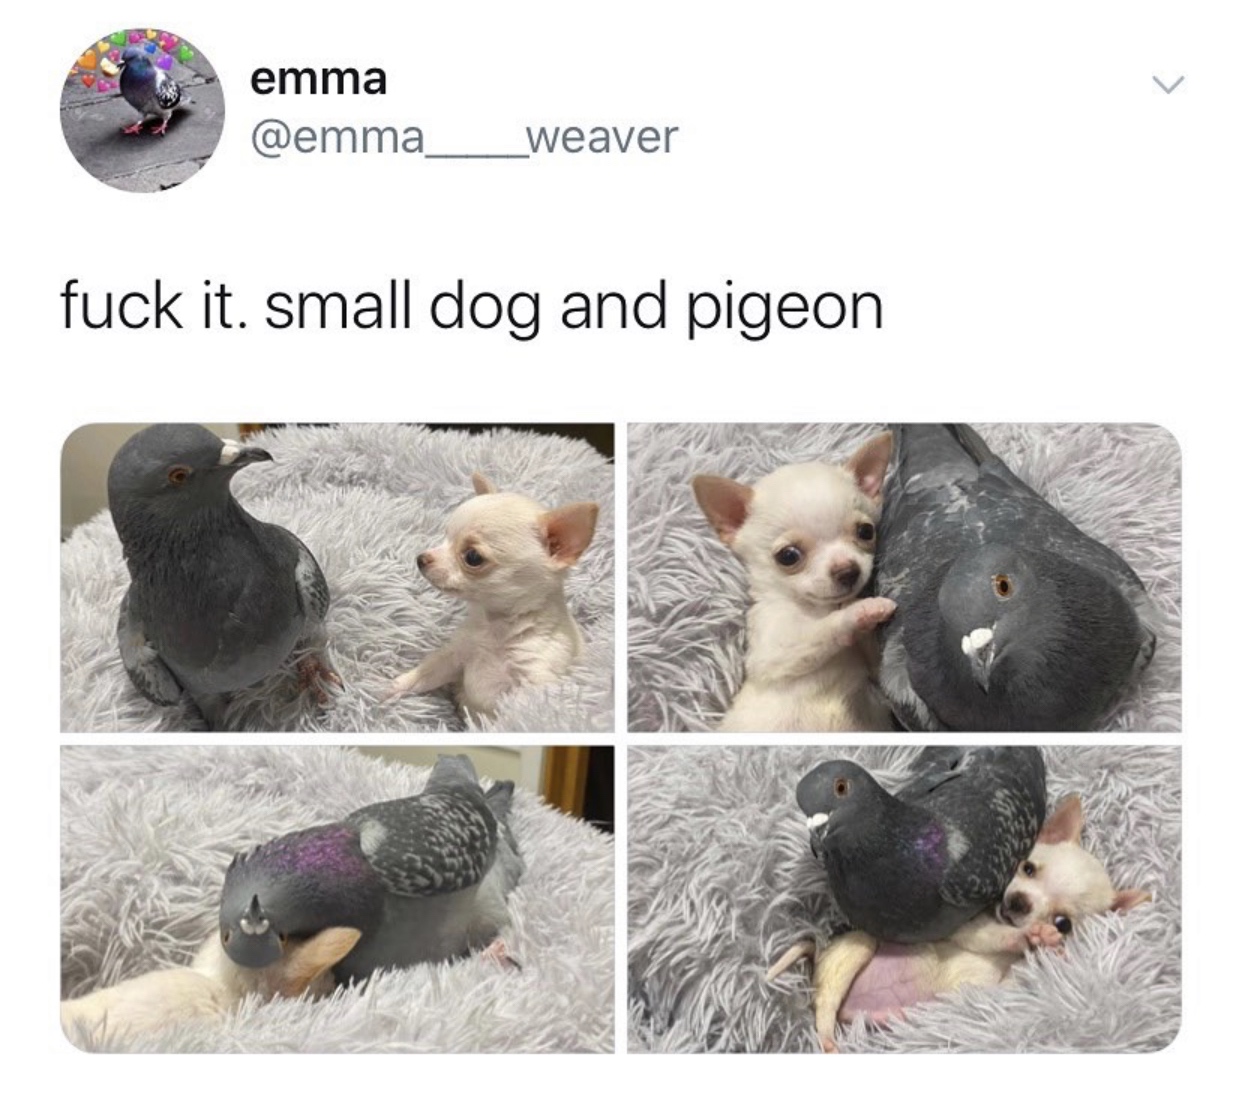 pet - emma fuck it. small dog and pigeon